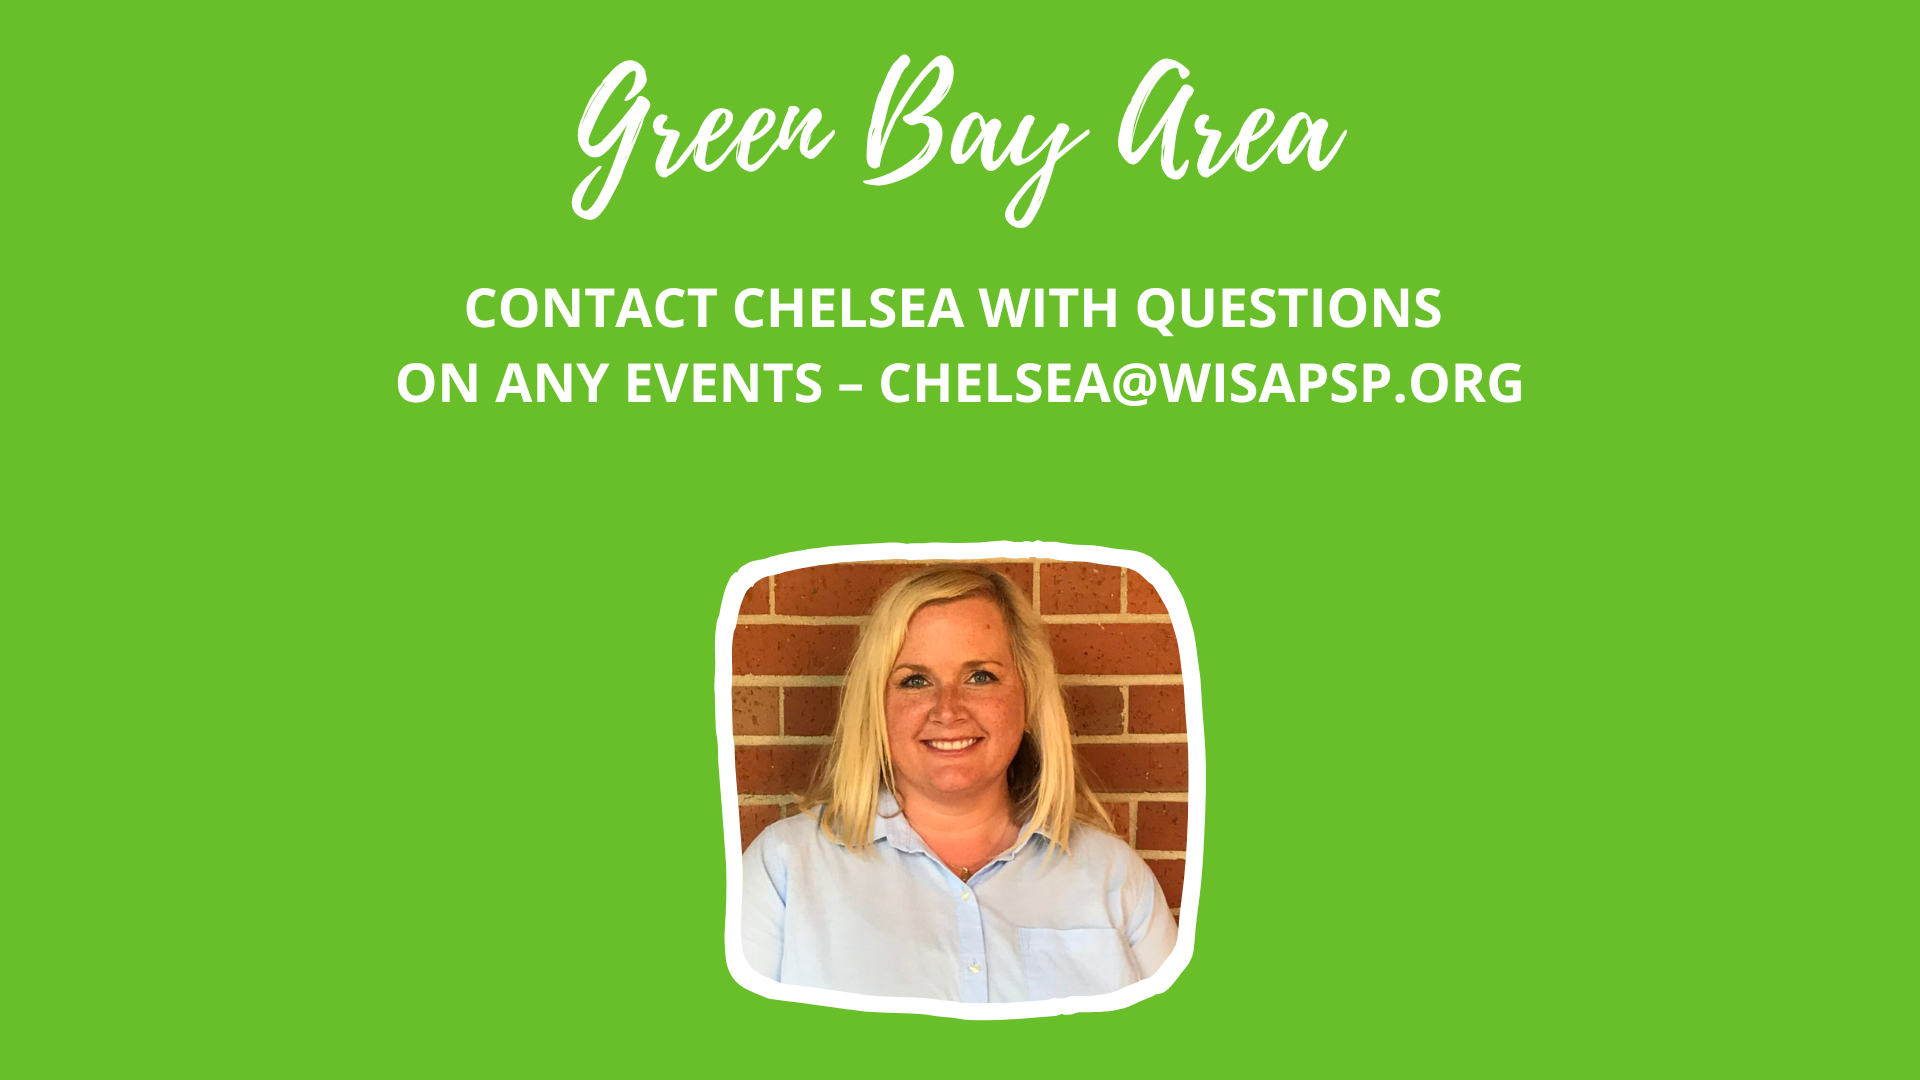 Contact Chelsea Green Bay